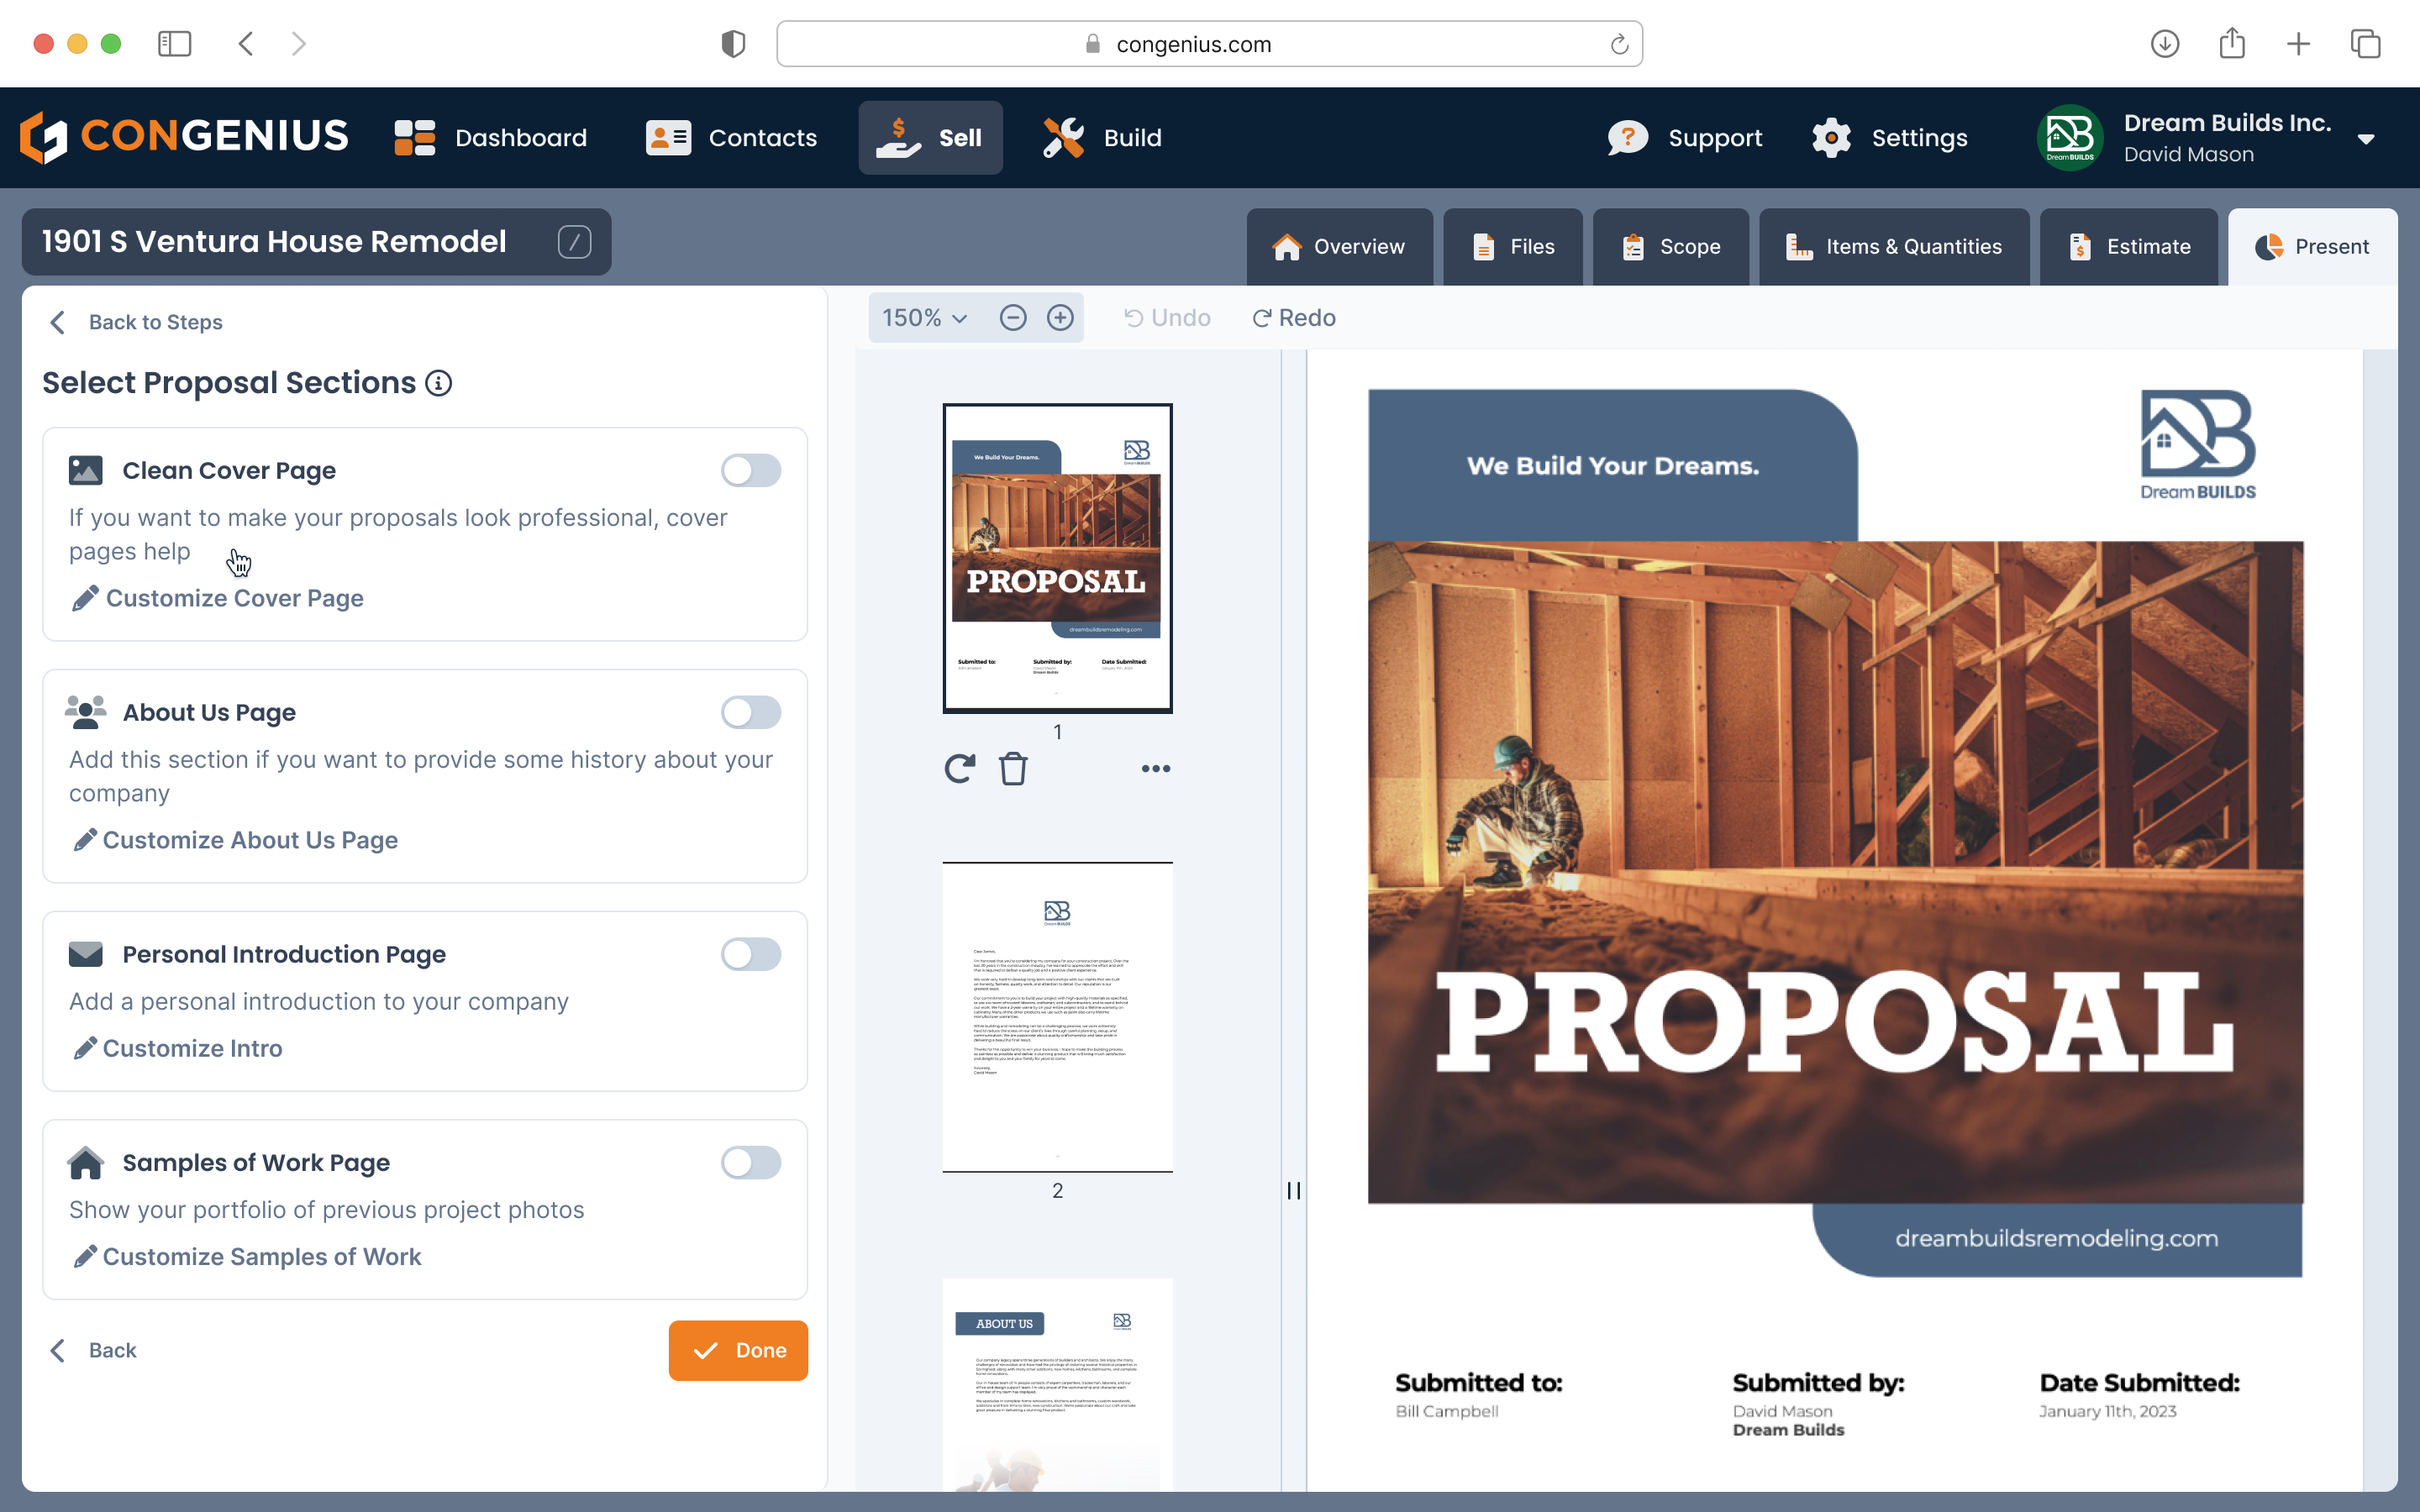 Easily and quickly build a professional proposal in ConGenius that will help you sell more jobs. Once all fields and photos are added, send out your proposal for an electronic signature to close jobs faster.